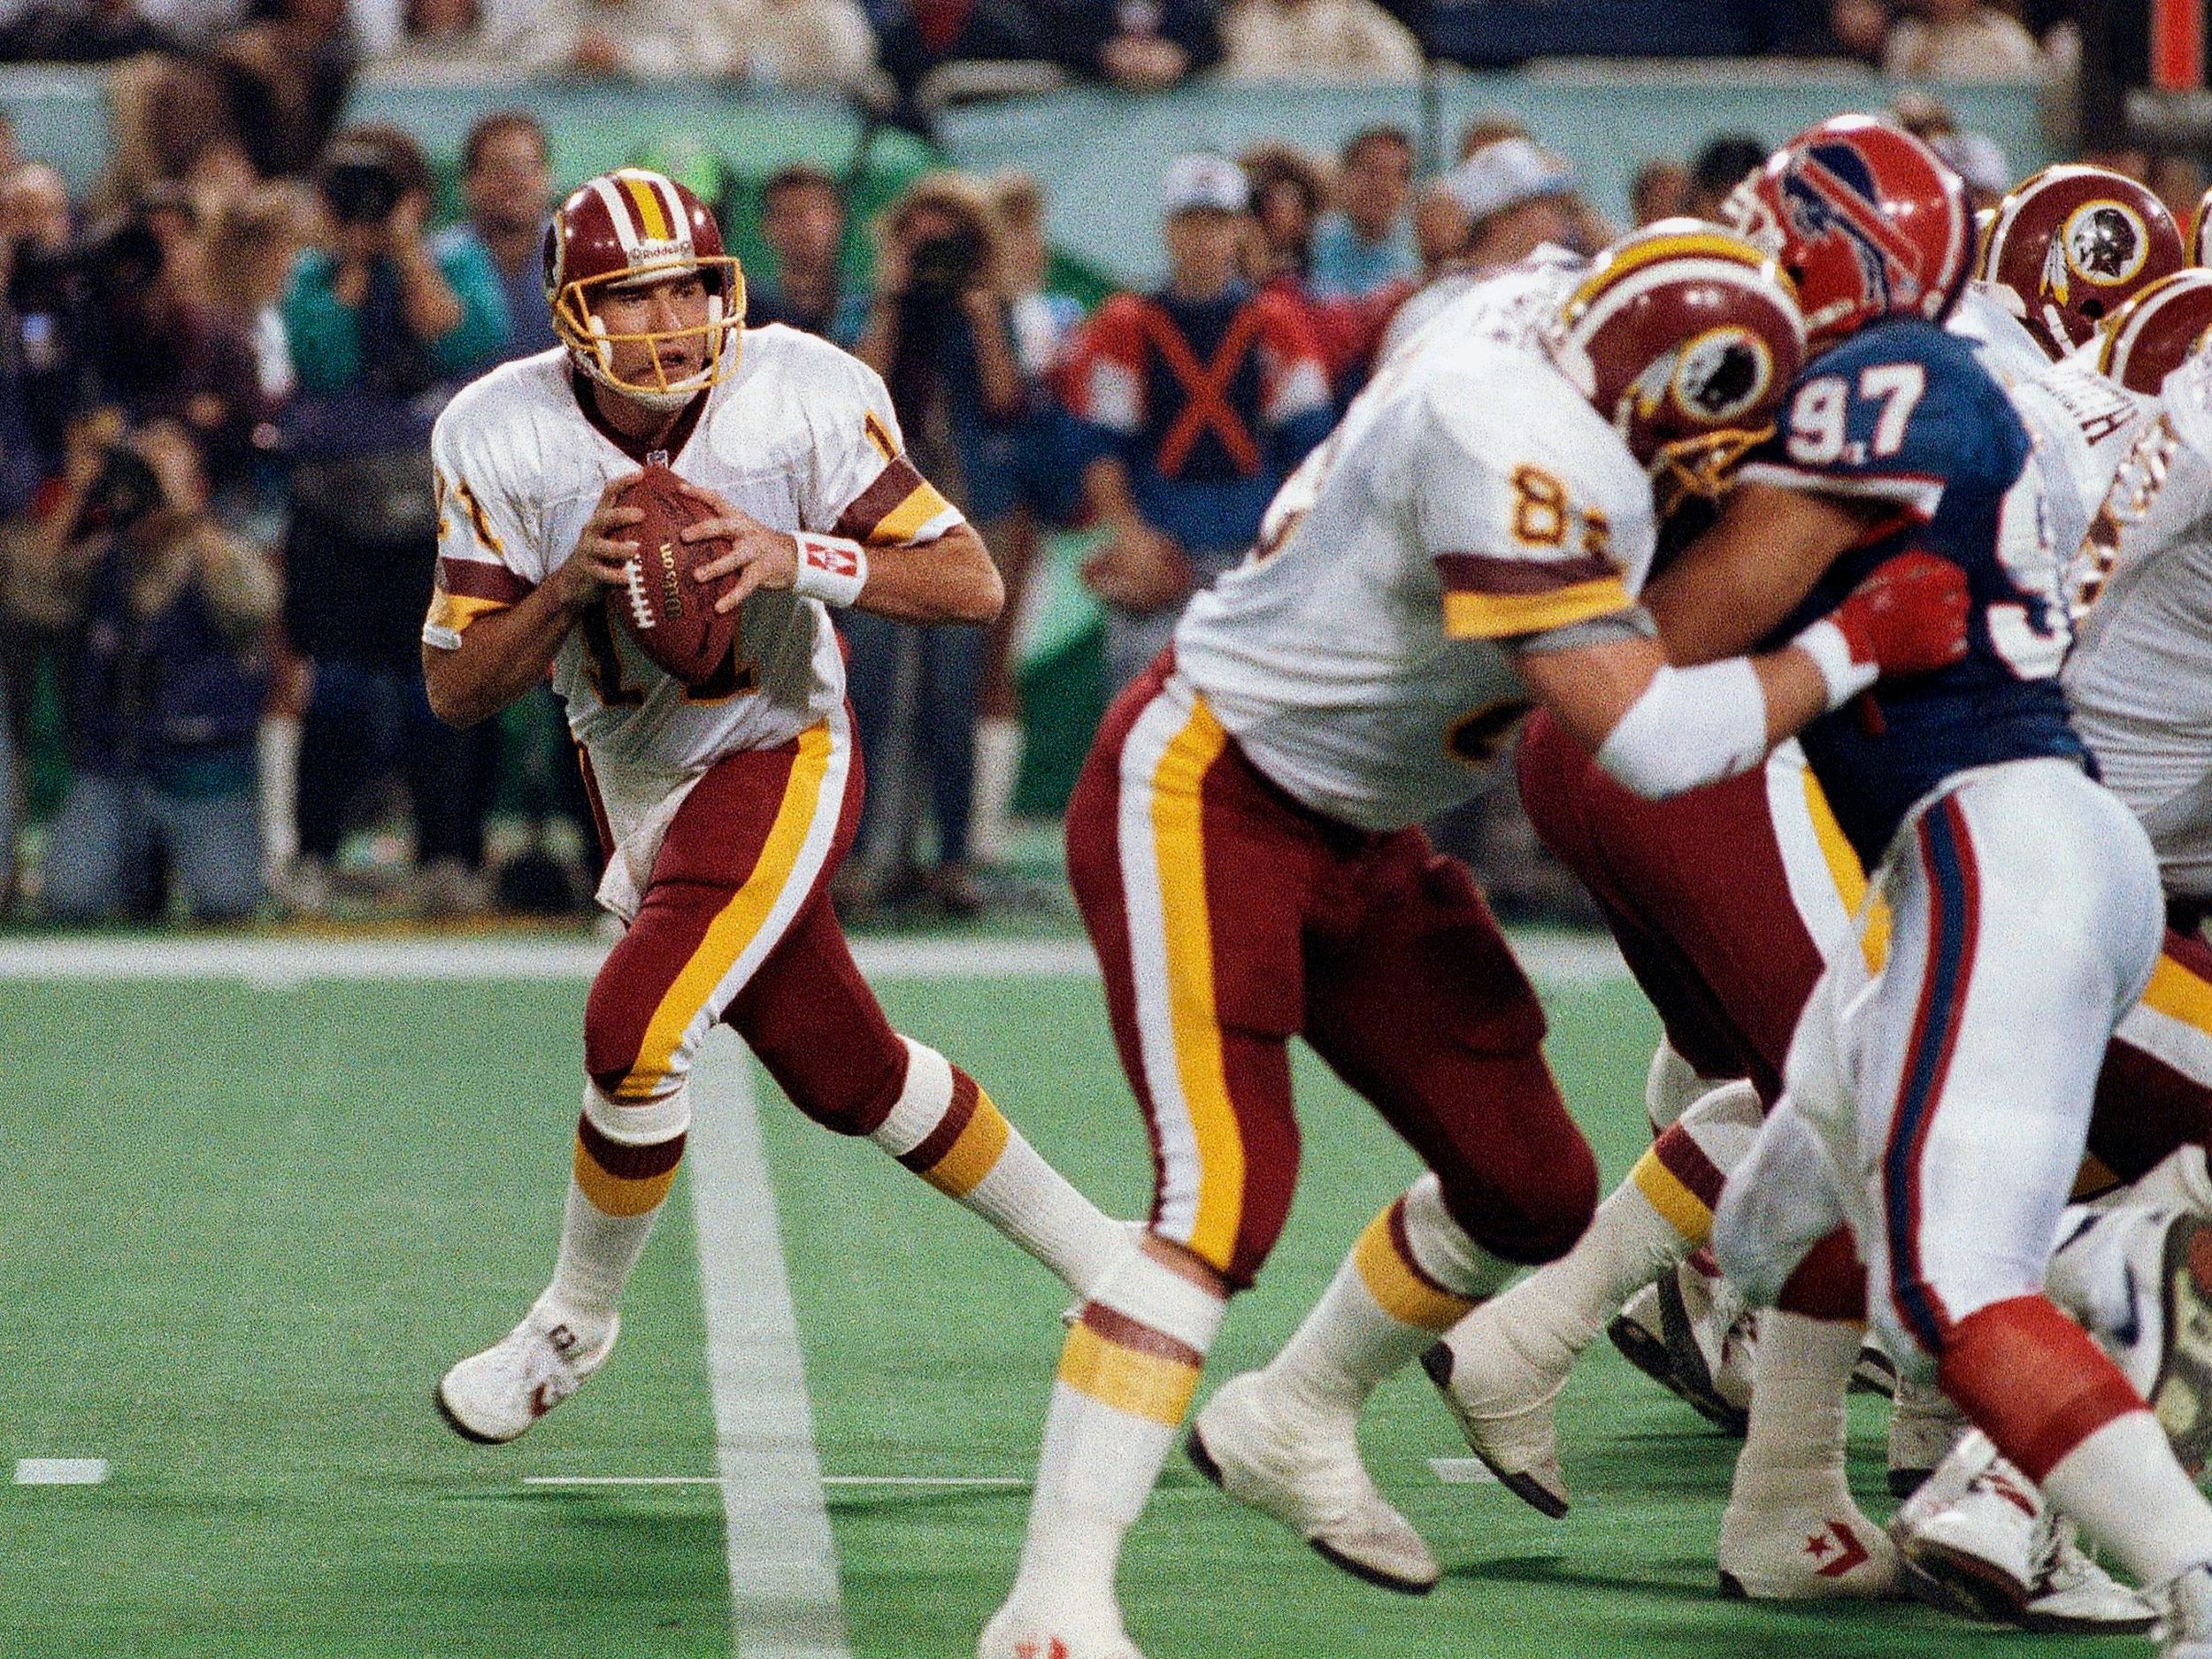 Ex-QB Mark Rypien: Settlement makes 'a great day'